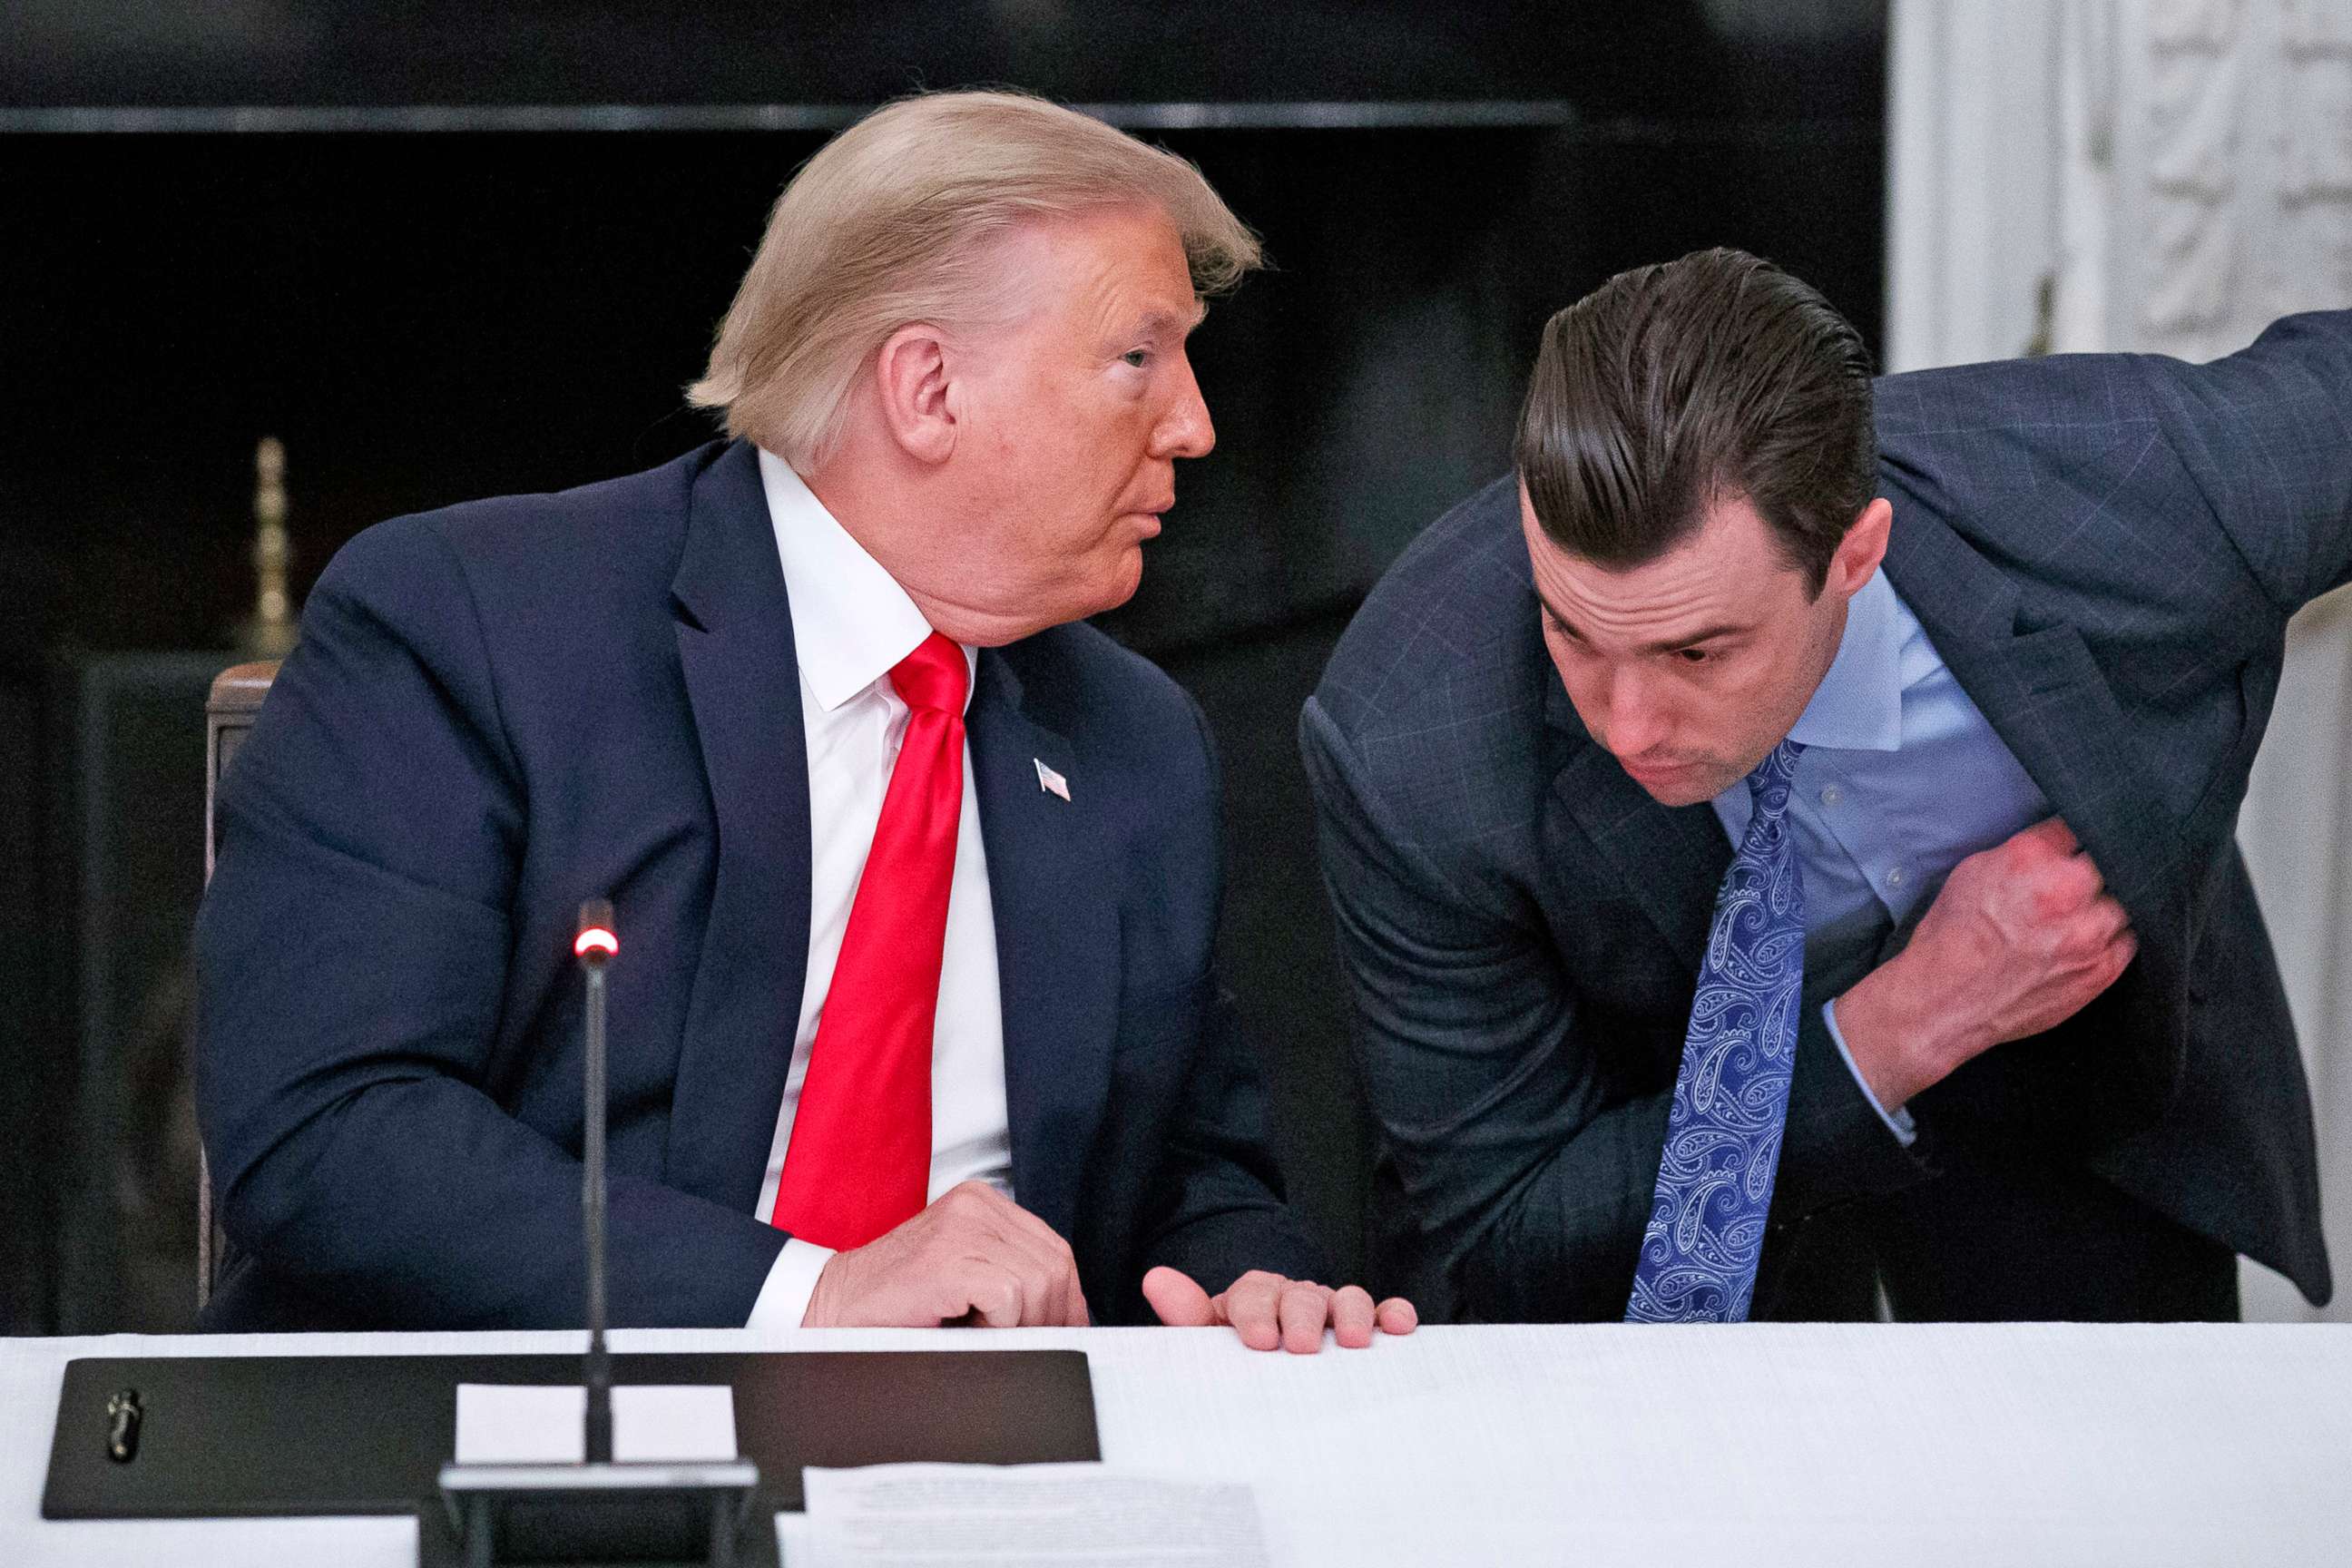 PHOTO: President Donald Trump speaks to White House special assistant to the president Nick Luna, during a roundtable with governors on the reopening of America's small businesses, at the White House, June 18, 2020.